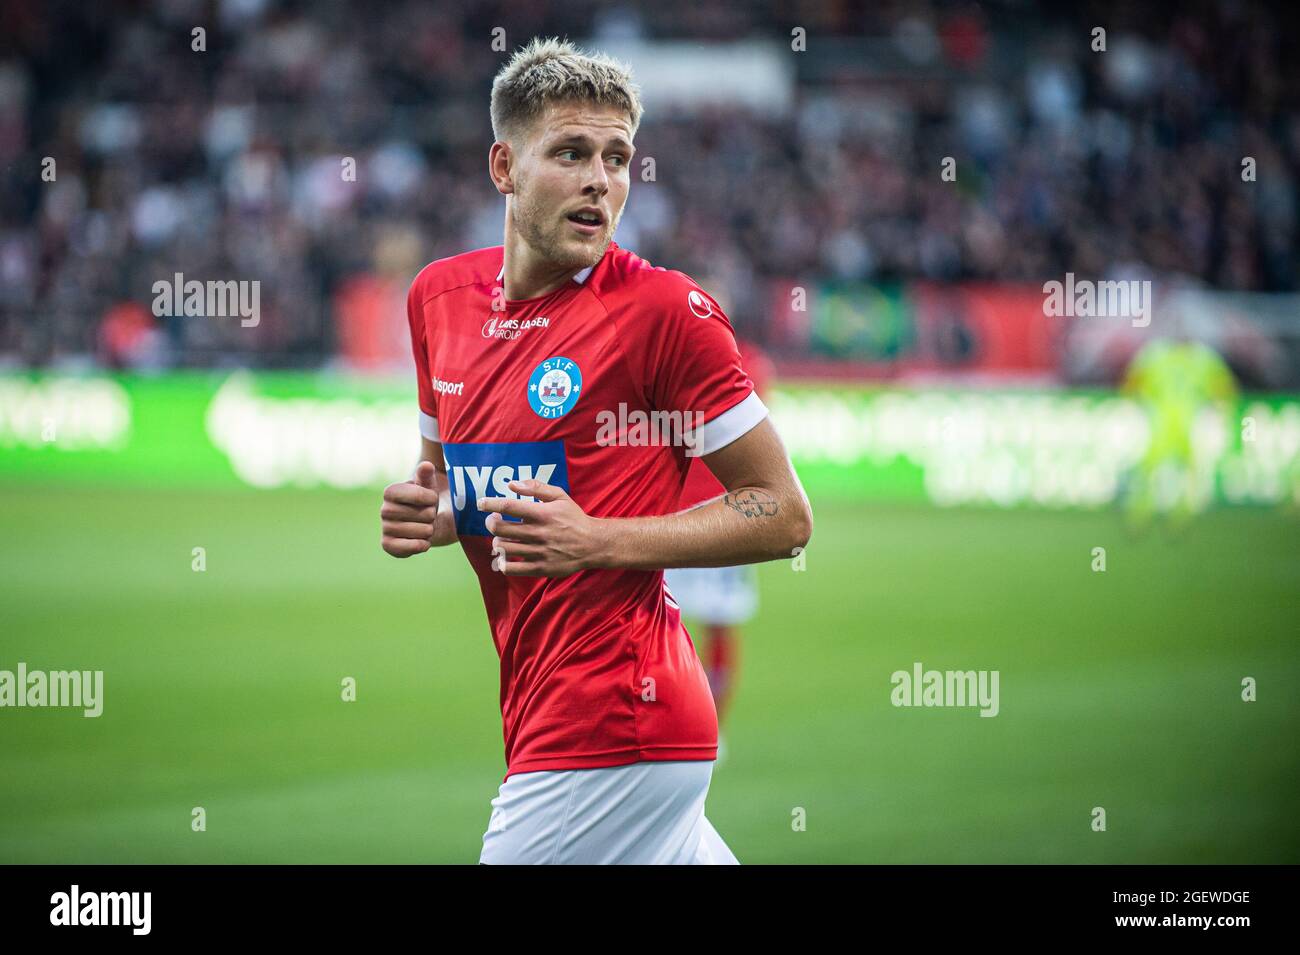 Herning, Denmark. 20th Aug, 2021. Nicolai Vallys (7) of Silkeborg IF seen during the 3F Superliga match between FC Midtjylland and Silkeborg IF at MCH Arena in Herning. (Photo Credit: Gonzales Photo/Alamy Live News Stock Photo